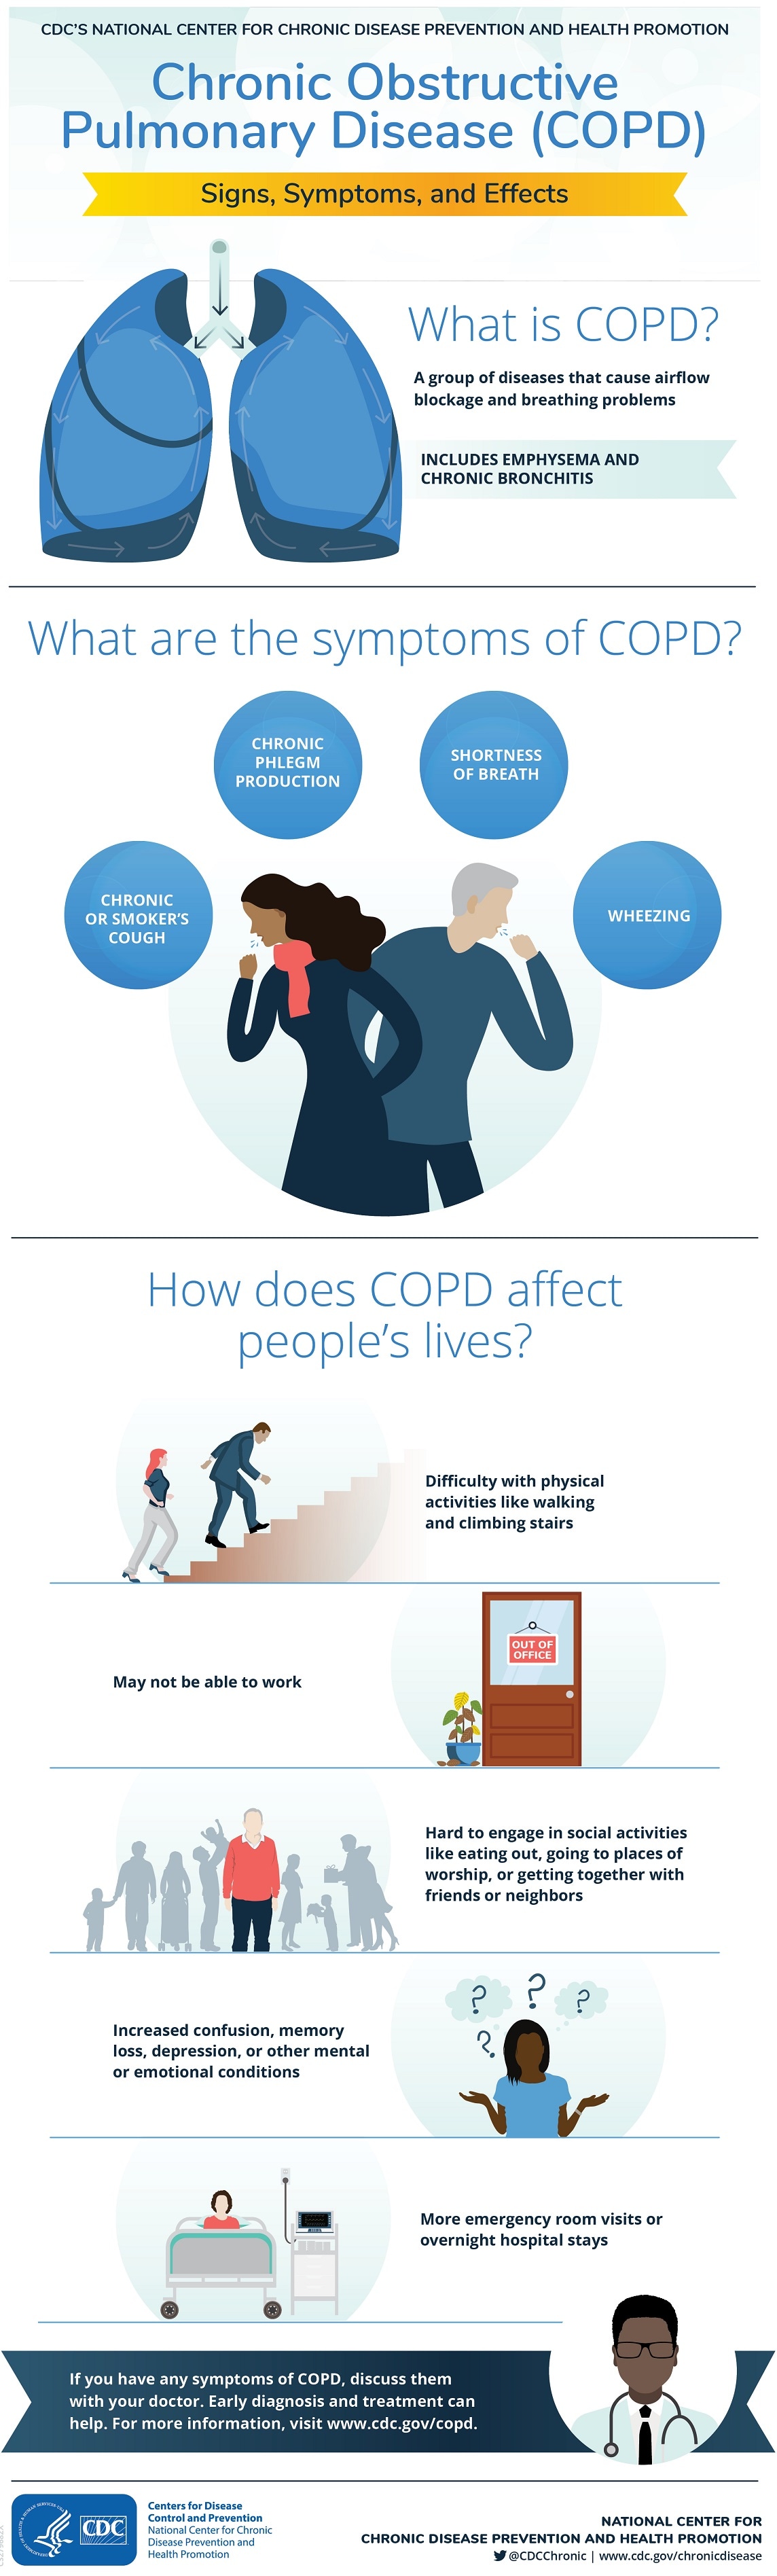 COPD signs, symptoms and effects